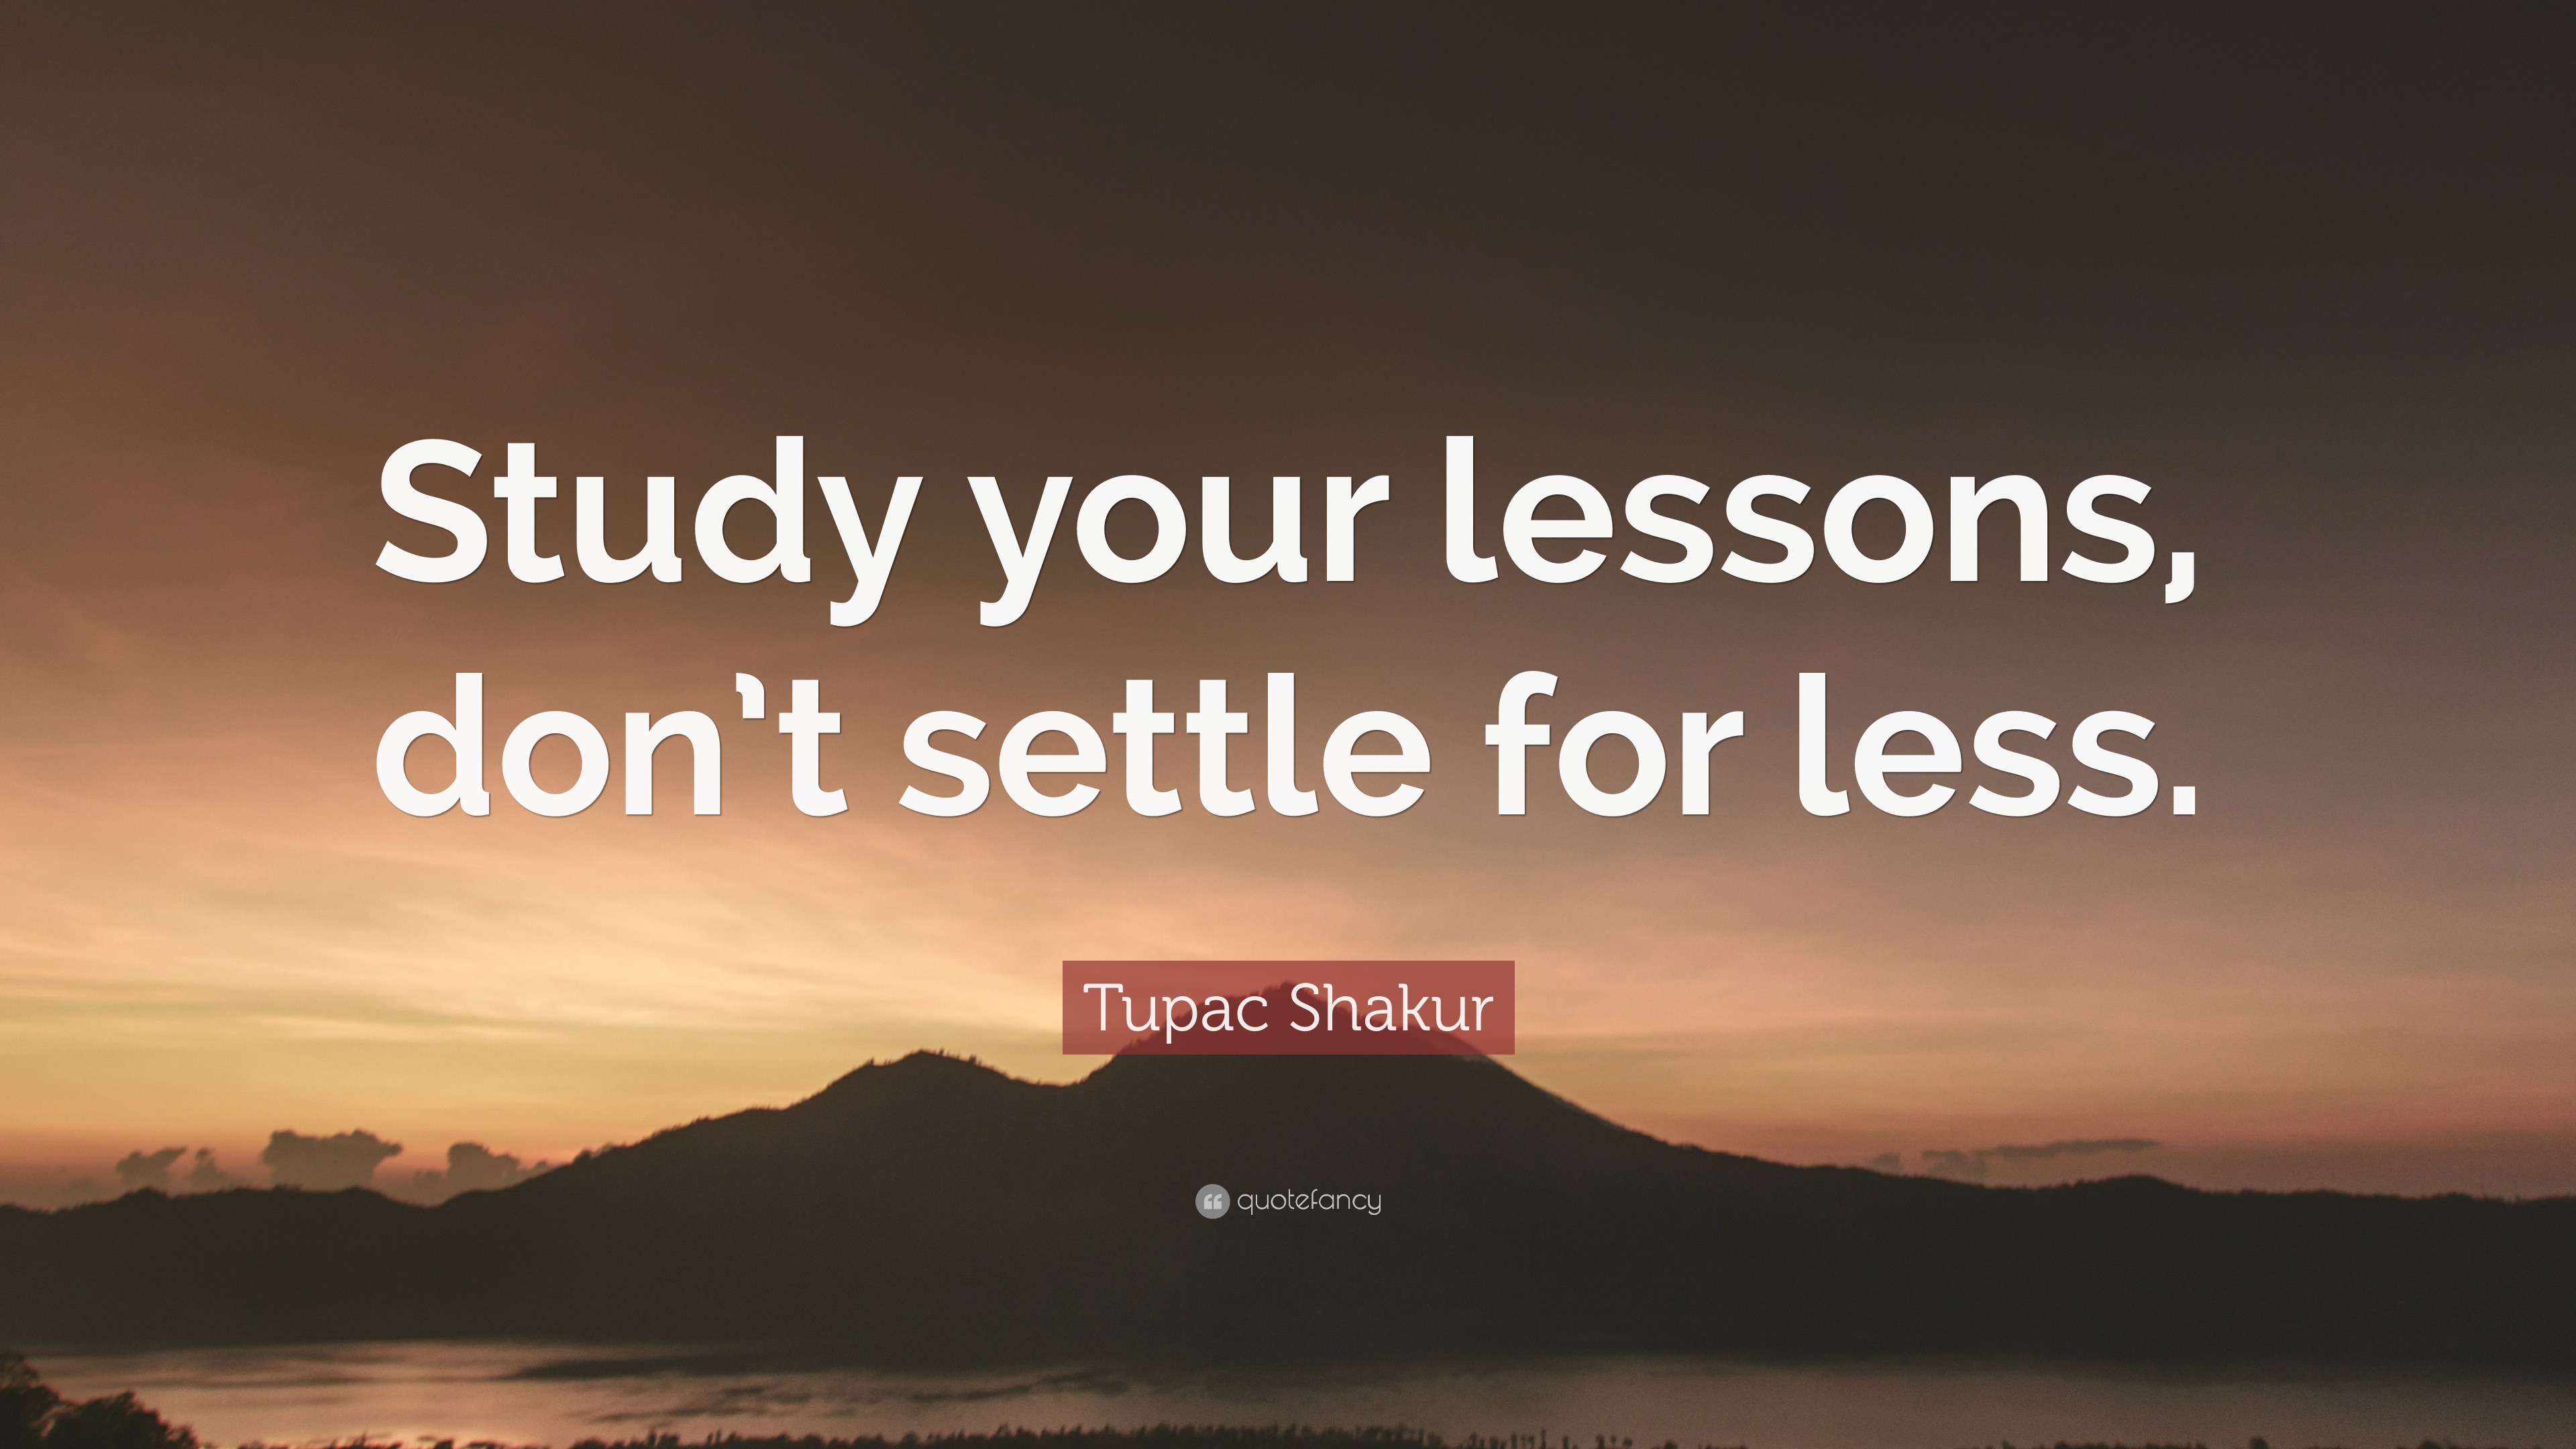 Tupac Shakur Quote “Study your lessons, don’t settle for less.”